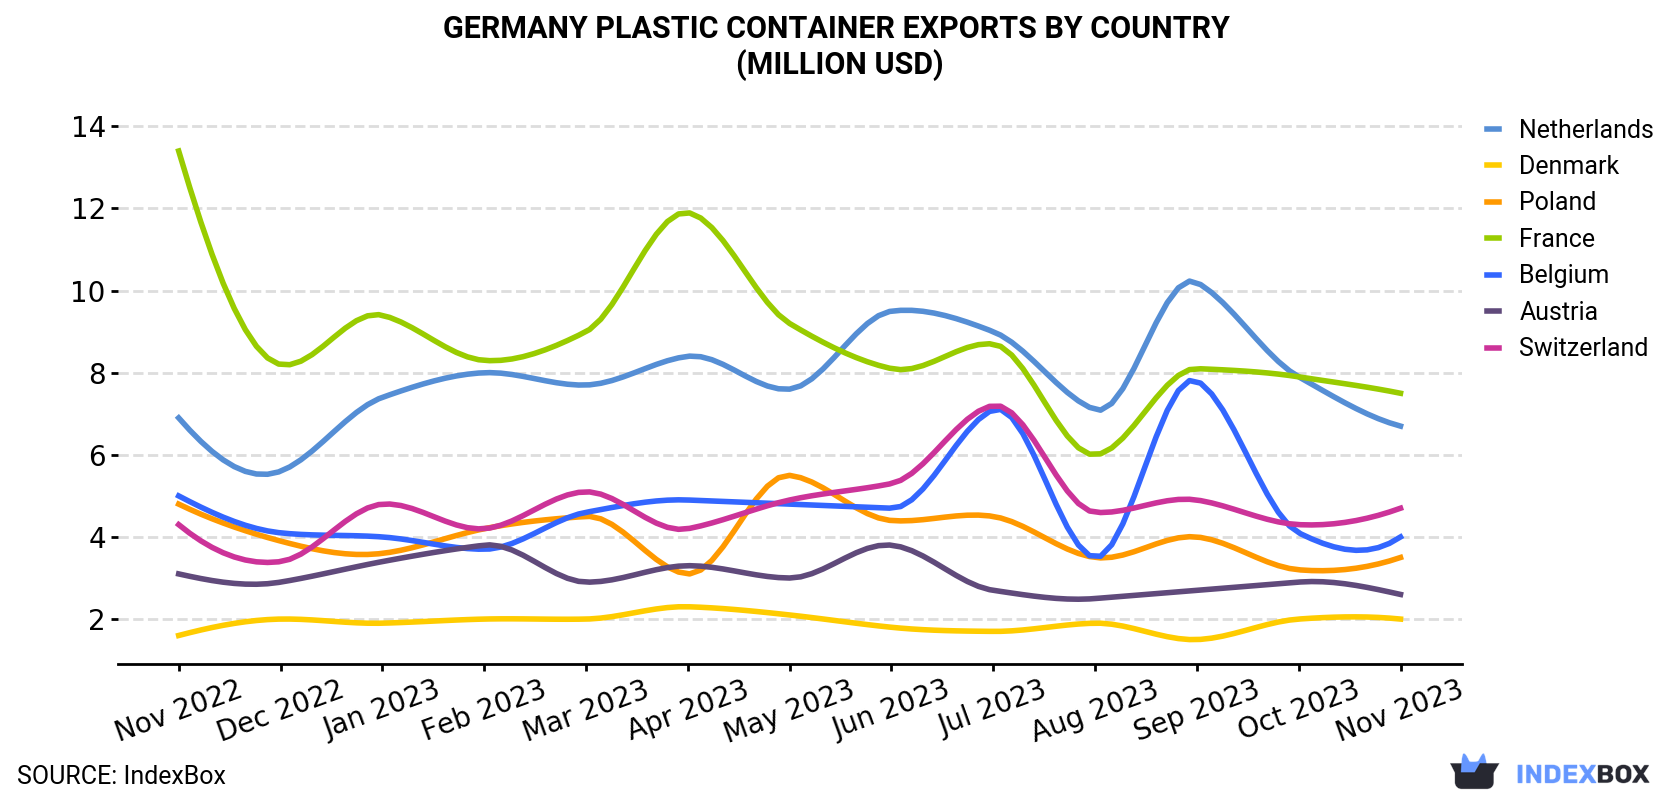 Germany Plastic Container Exports By Country (Million USD)